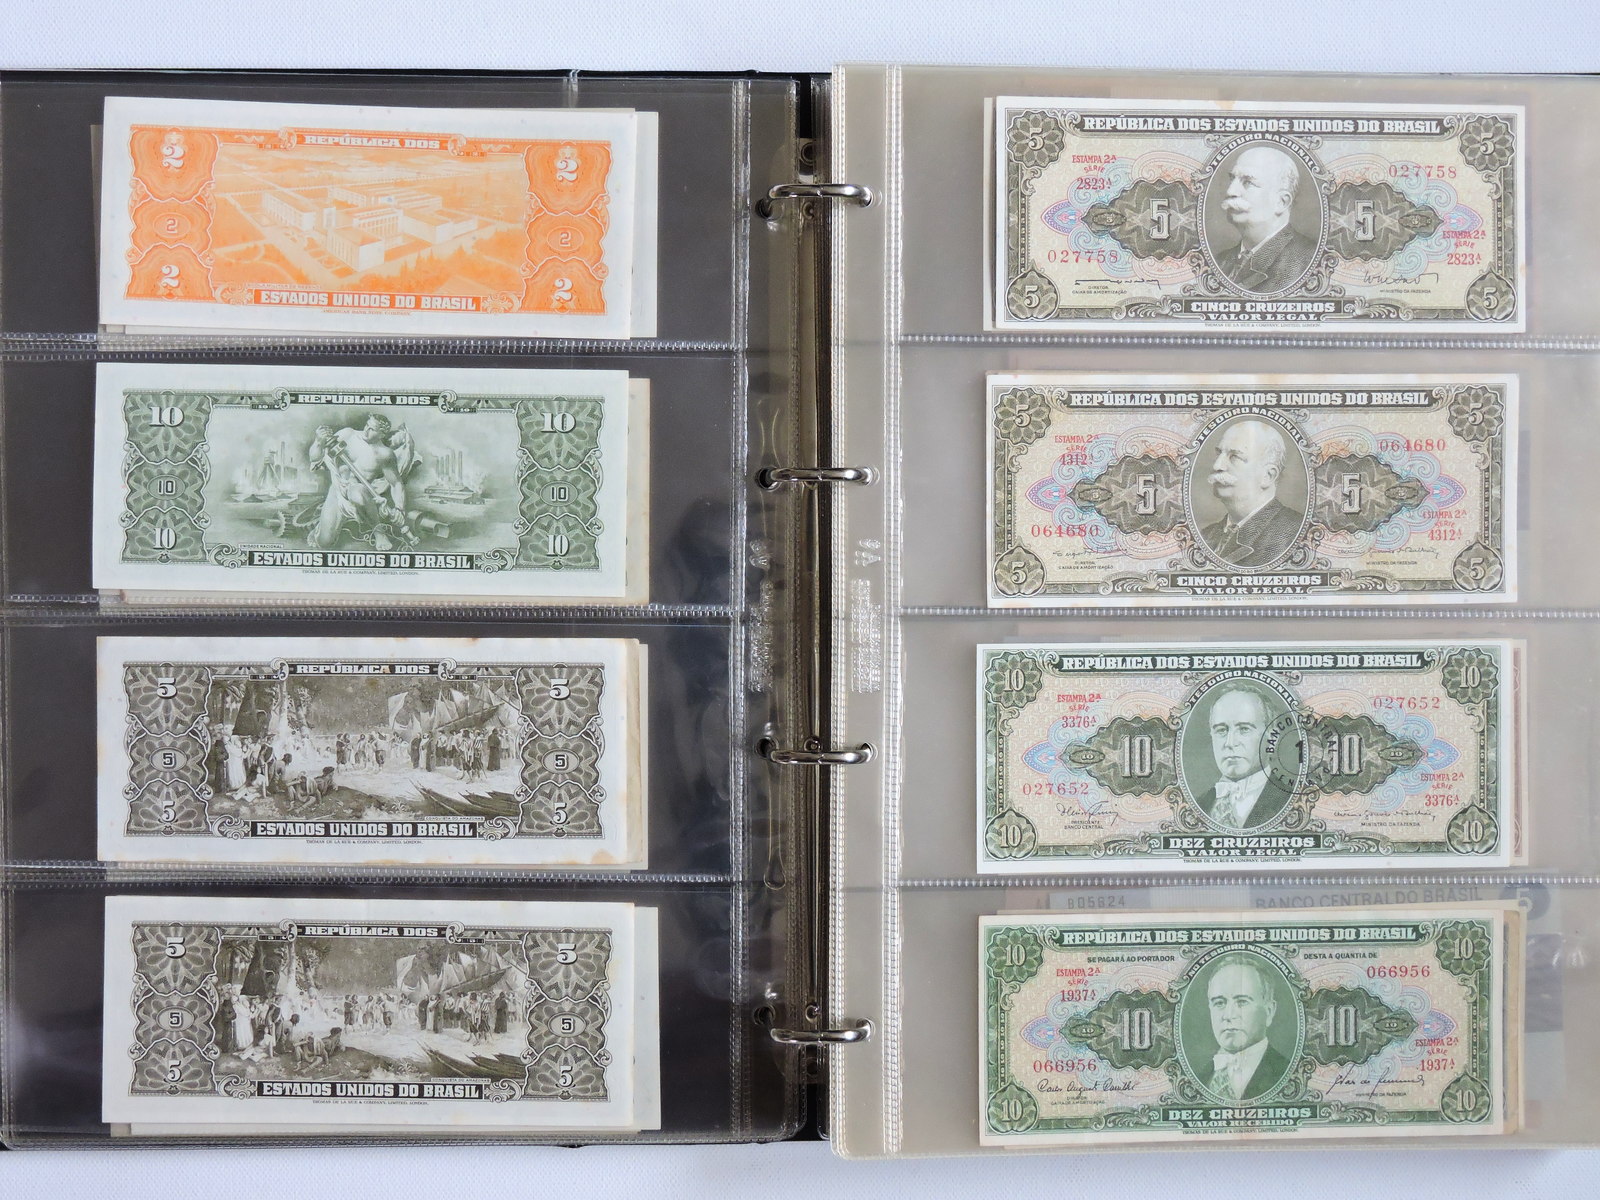 Banknotes, Brazil and Argentina
, page:6, item:1